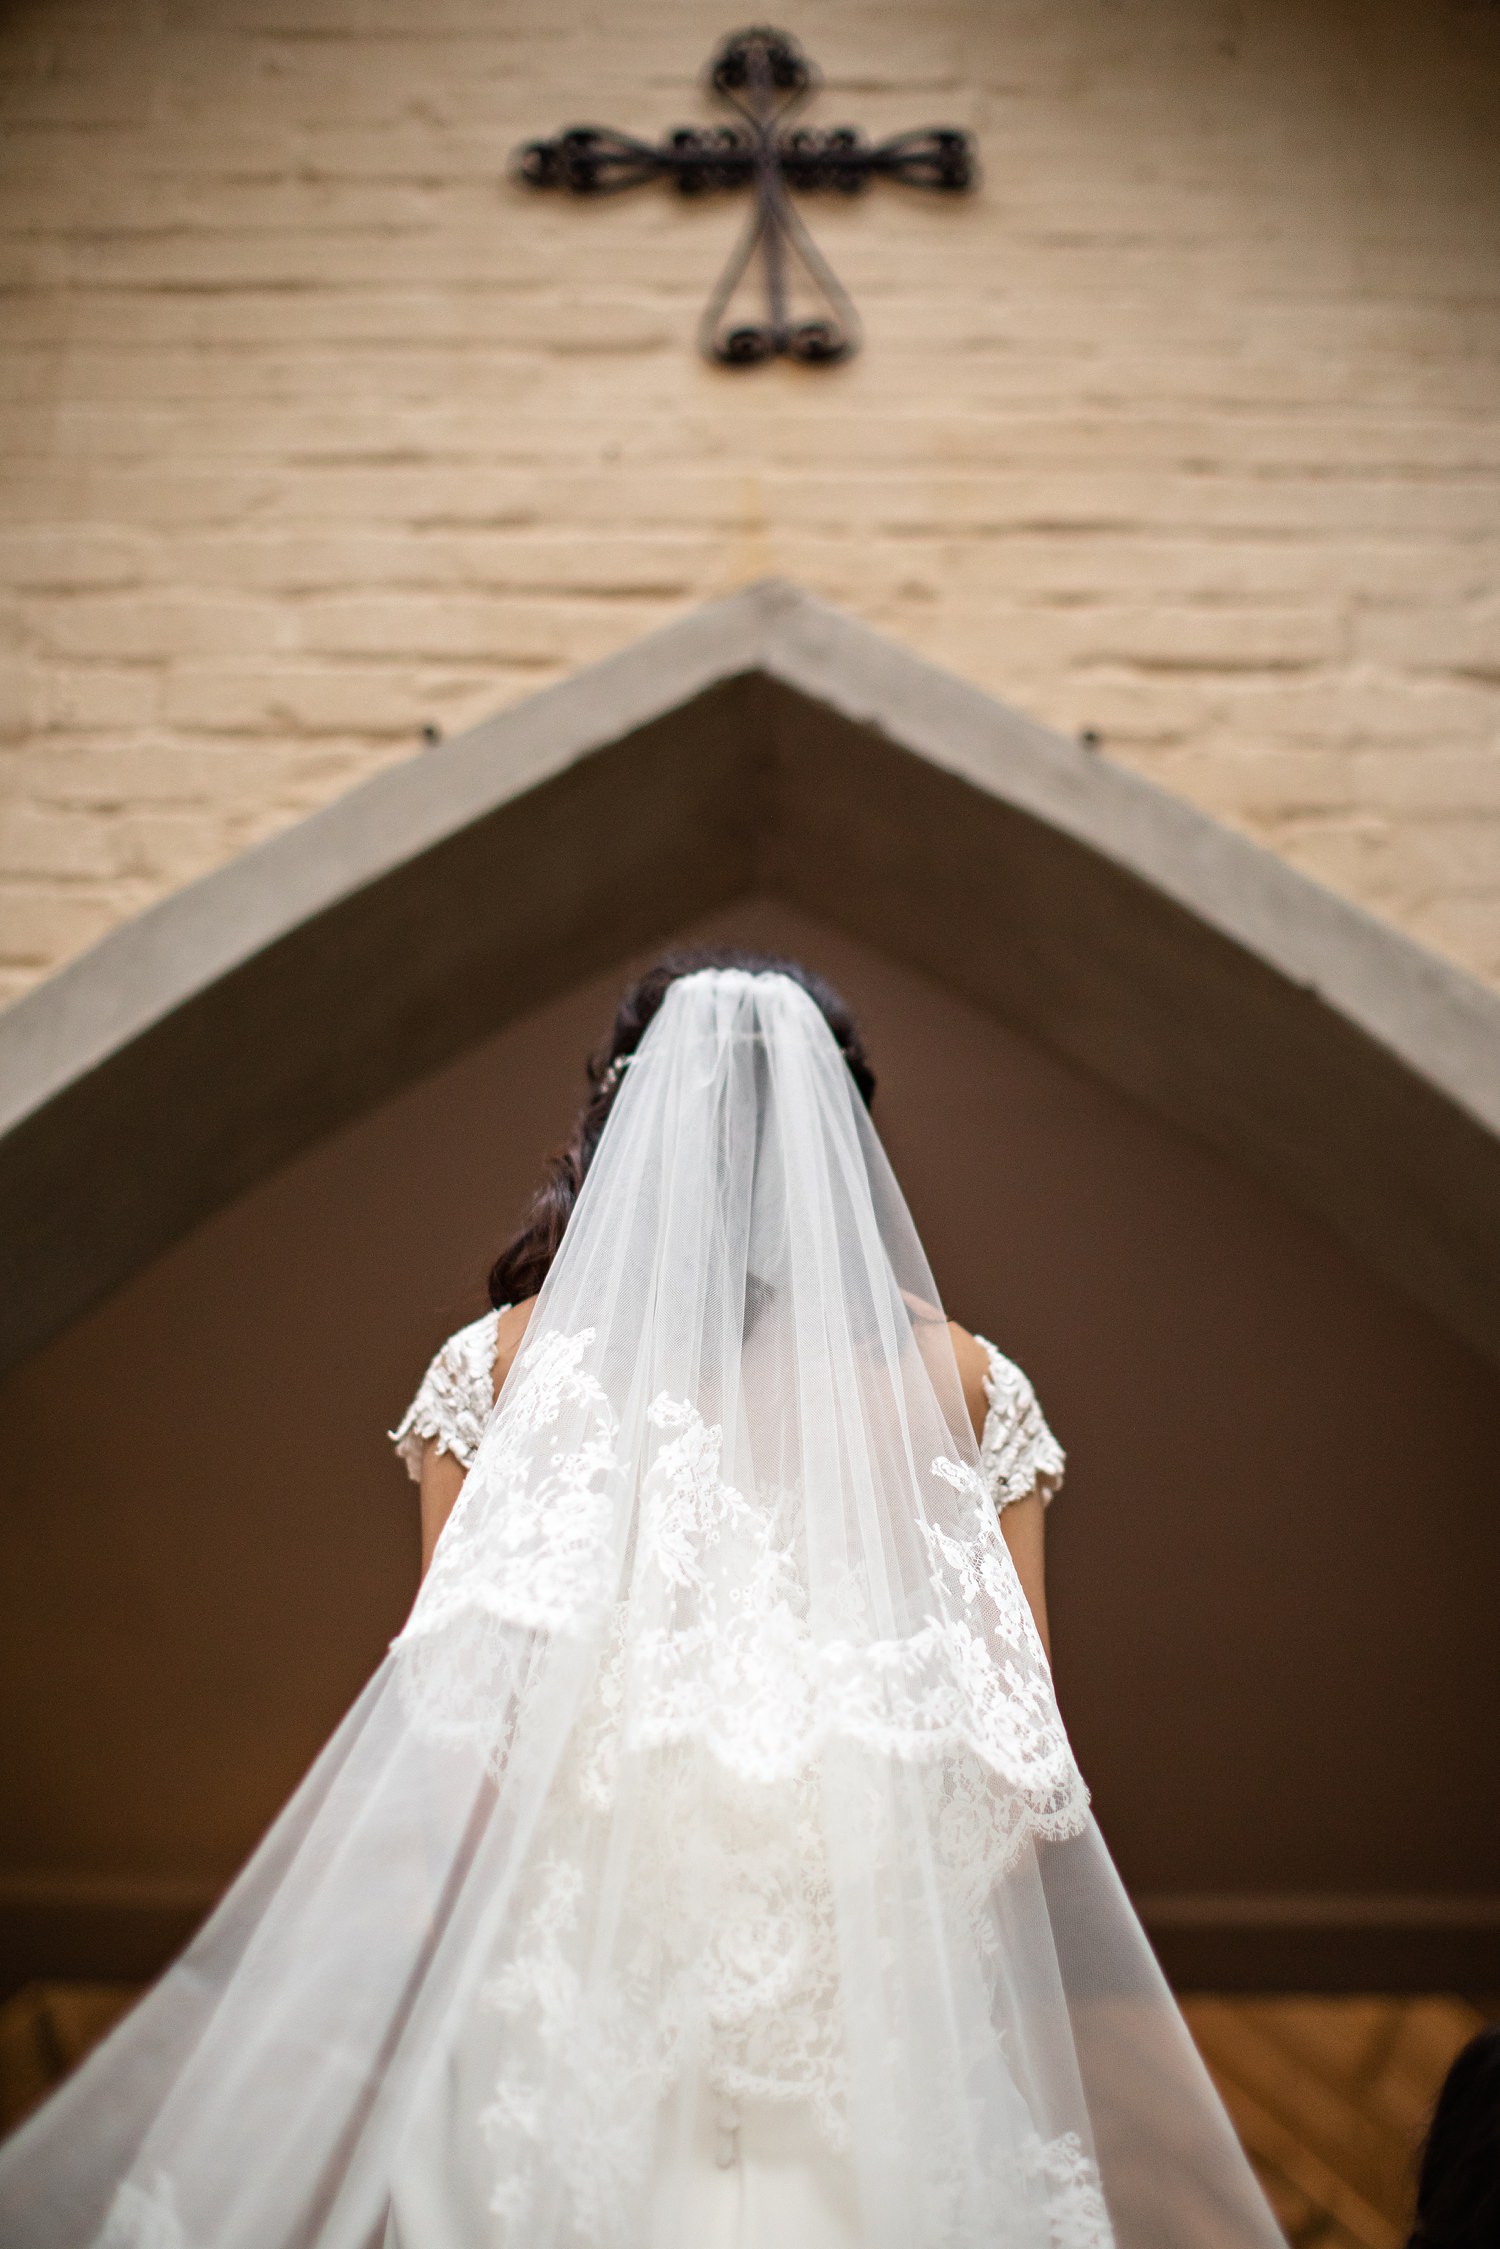 View from behind as the bride walks through the chapel arch at The Plantation Wedding Venue in Port Elizabeth